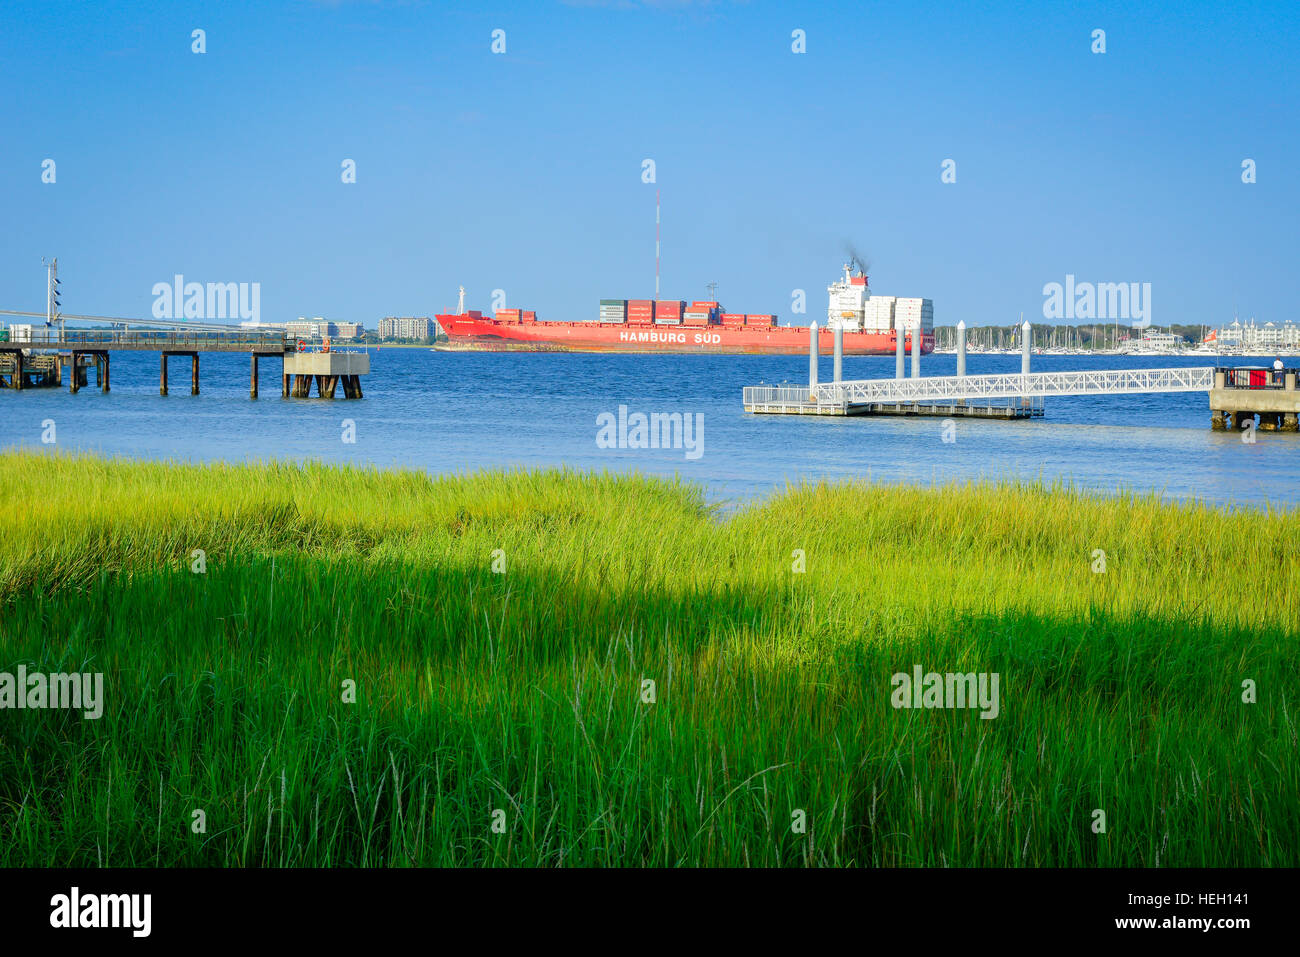 Lowcountry Green Grassy marsh along the wharves & docks on Cooper River with huge container ships in distance in Charleston SC Stock Photo